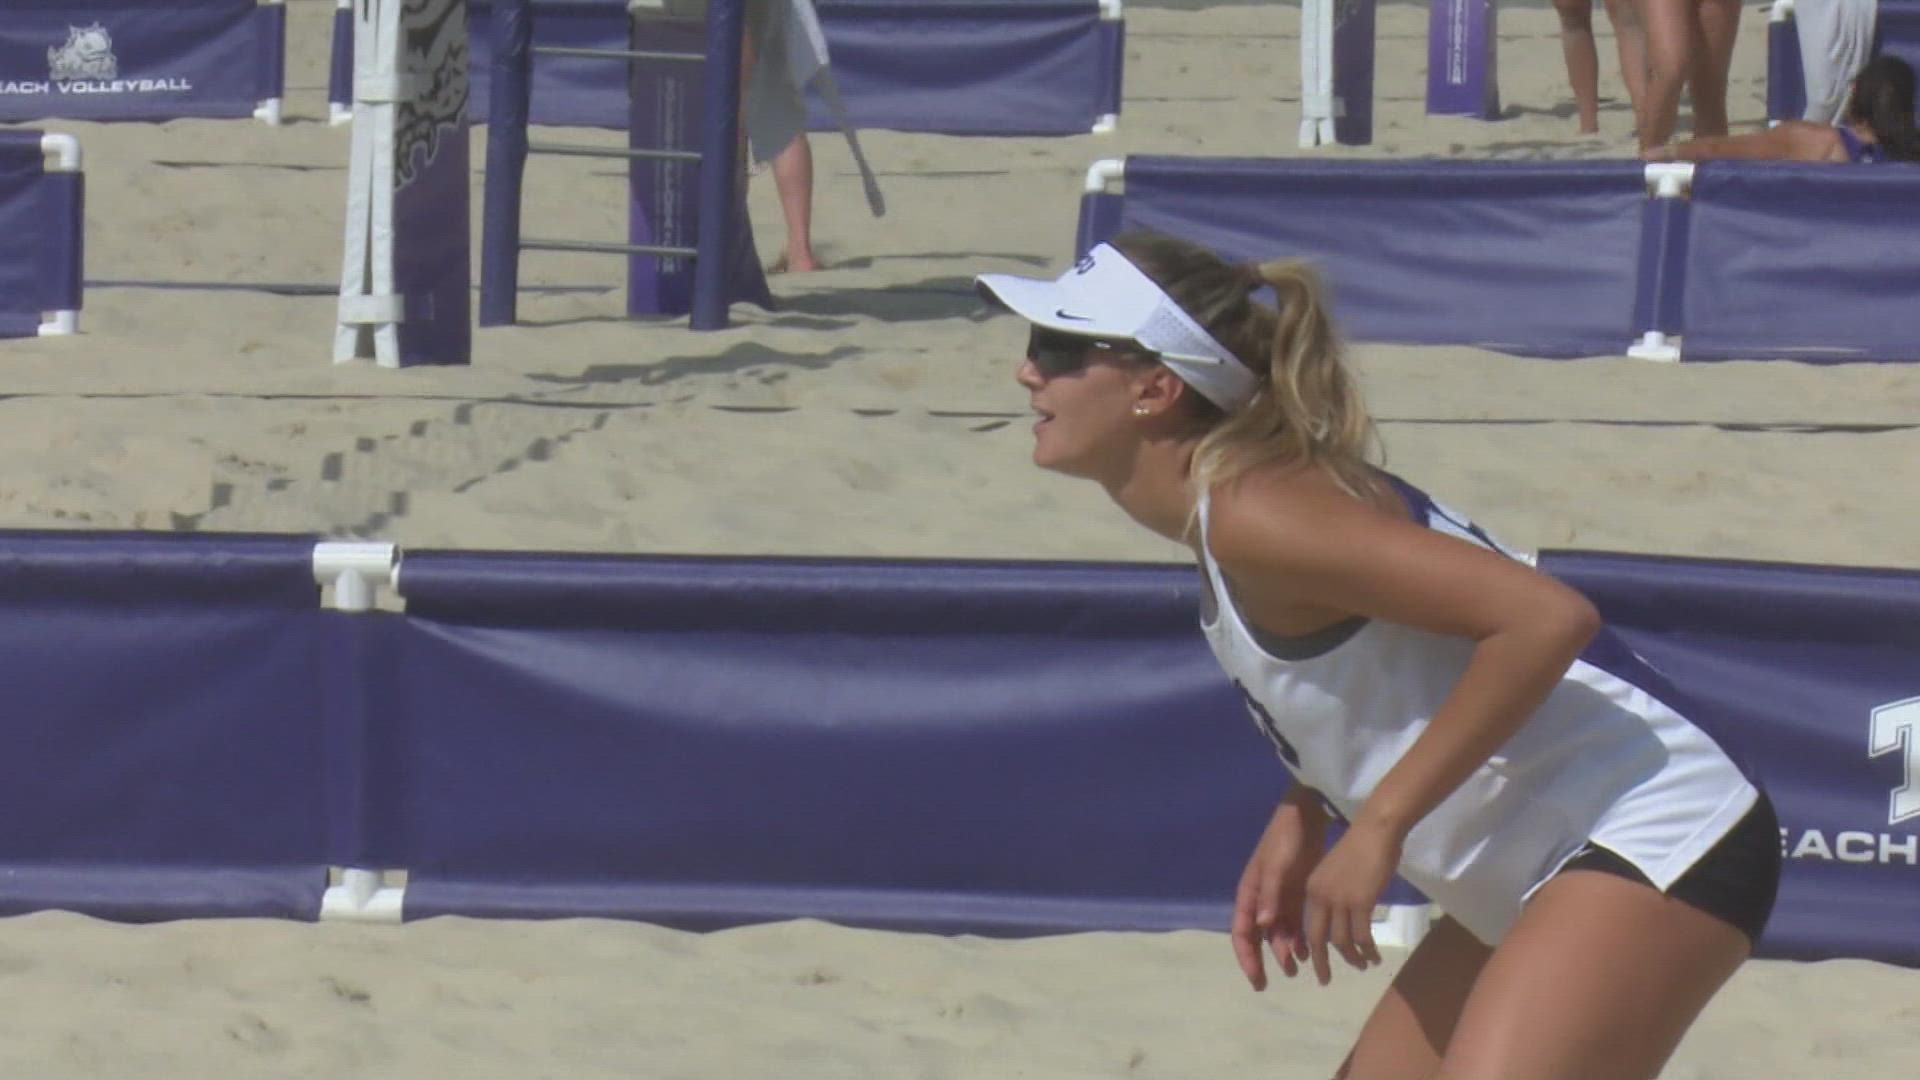 You will not find a beach anywhere near North Texas. Yet, that has not stopped TCU from putting together one of the top beach volleyball teams in the country.